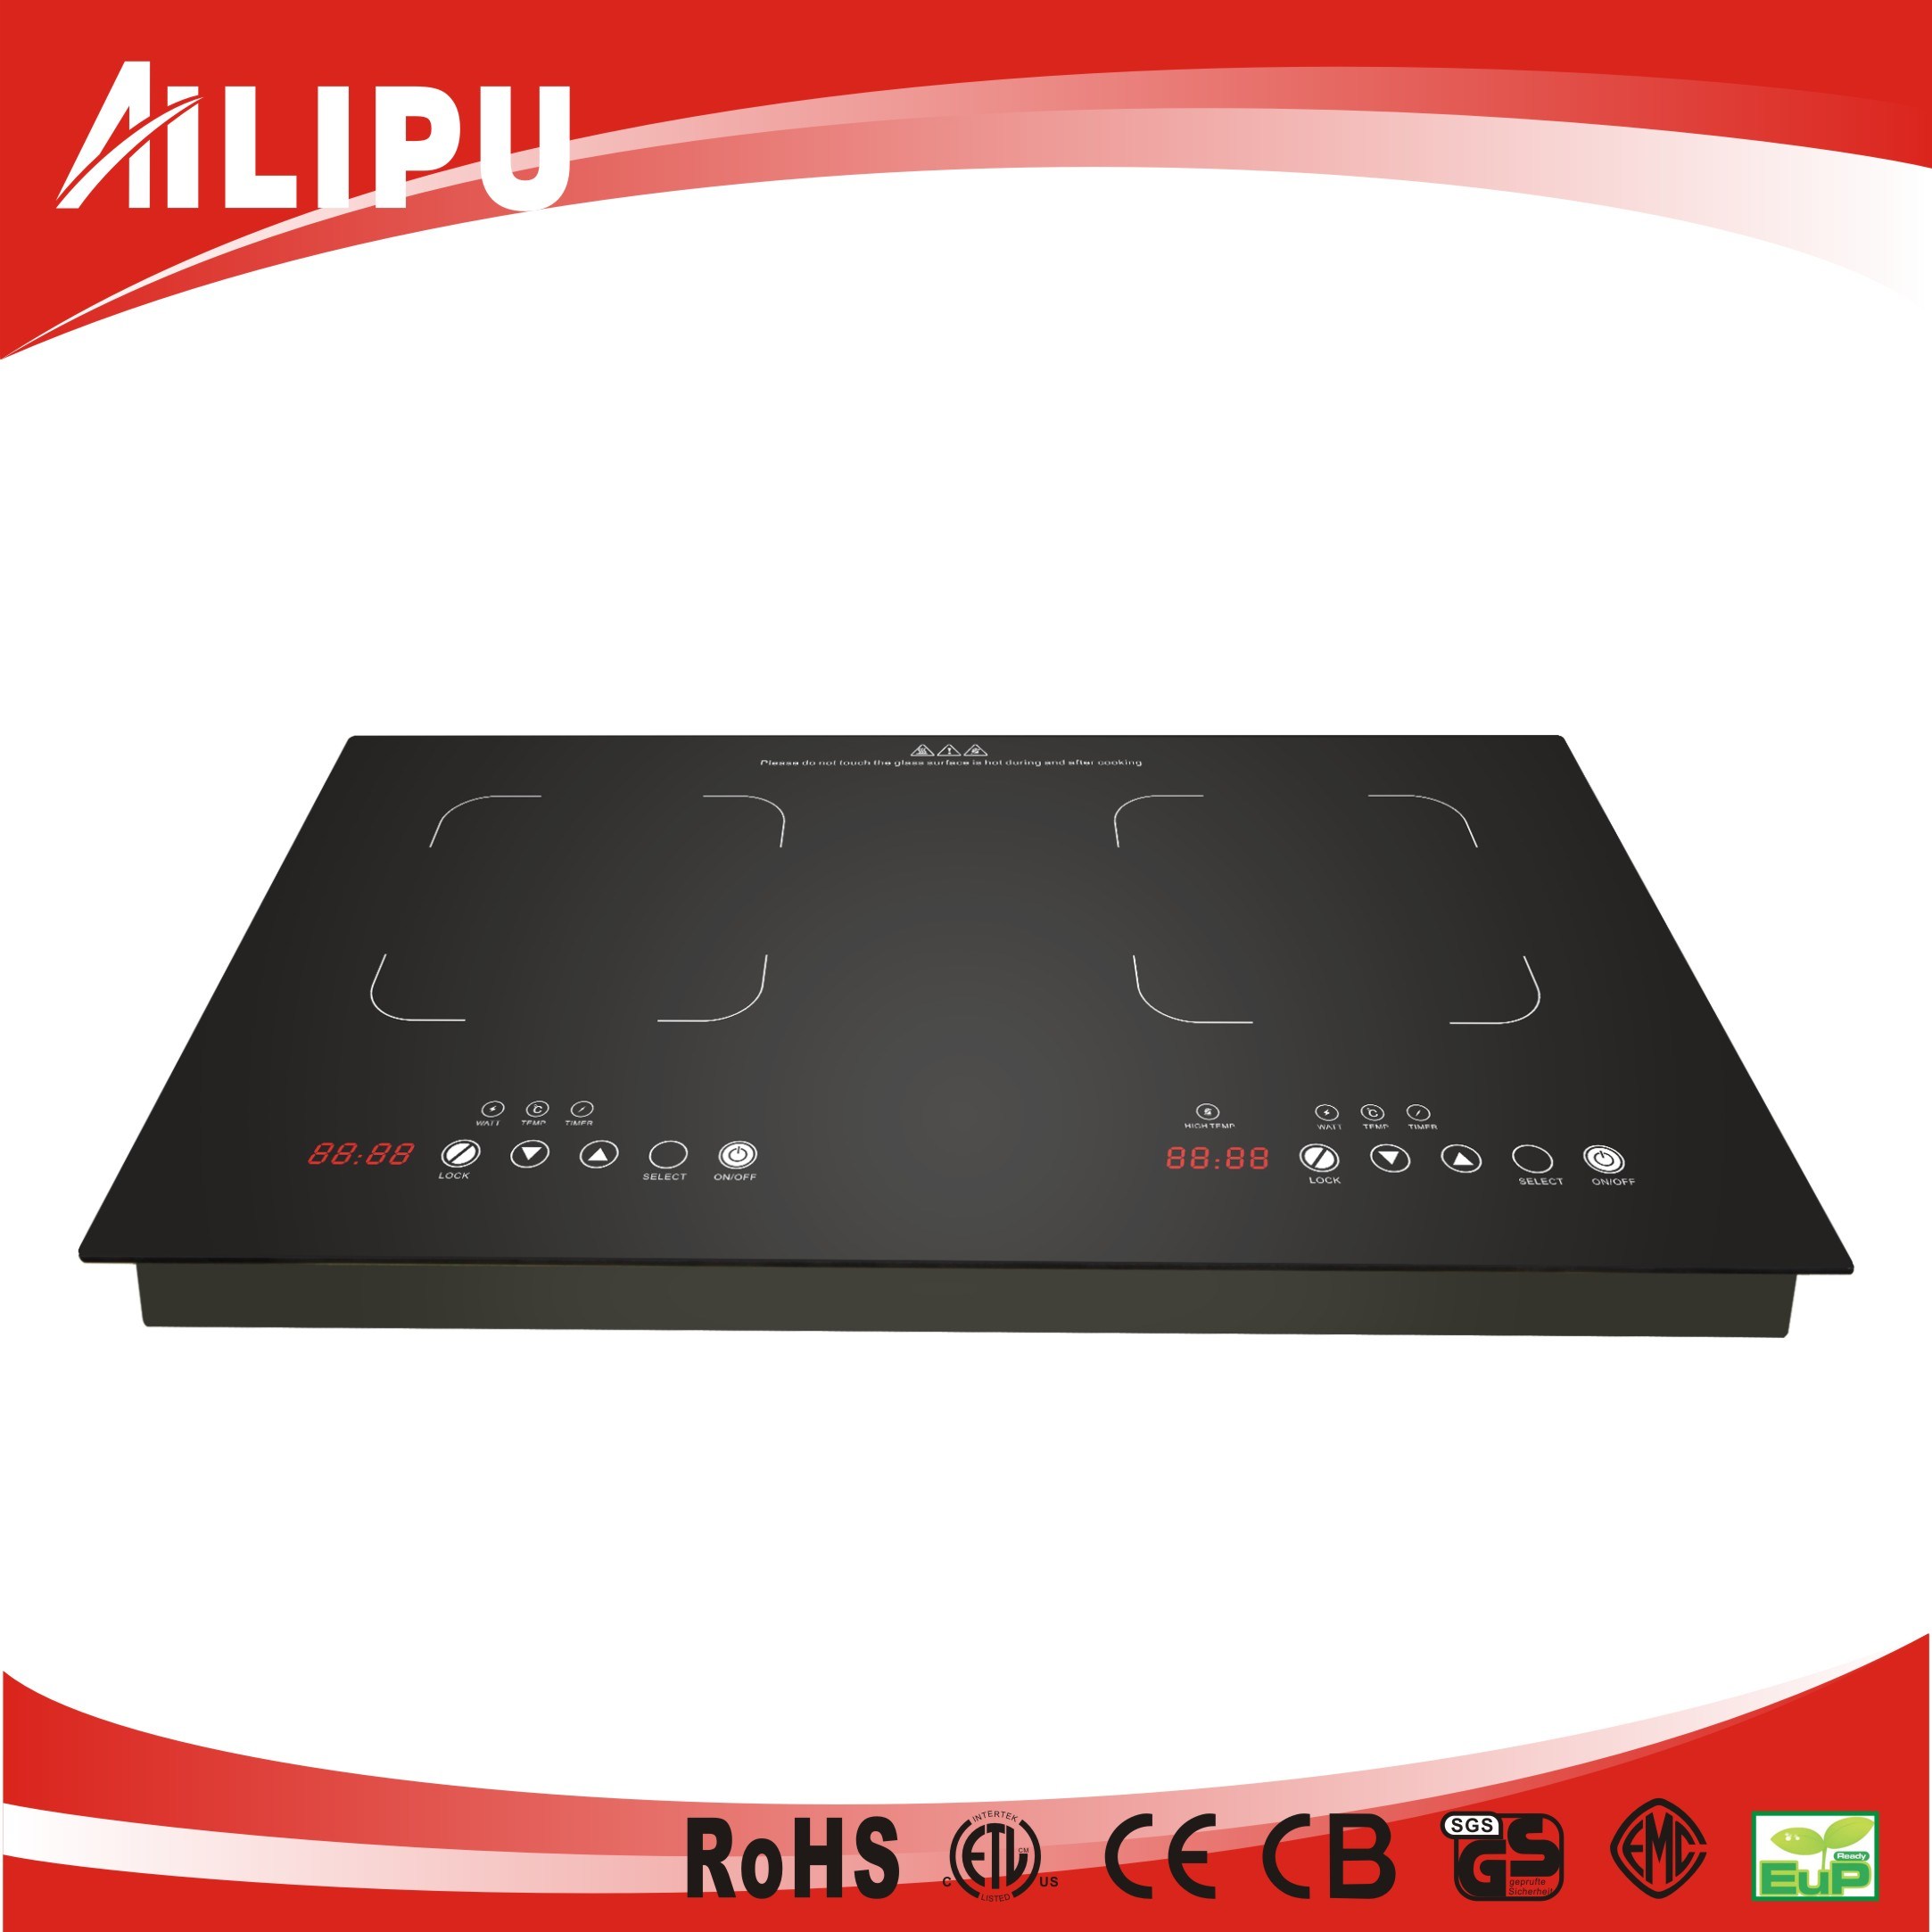 Double Burner Cookware of Home Appliance, Kitchenware, Infrared Heater, Stove, (SM-DIC09)